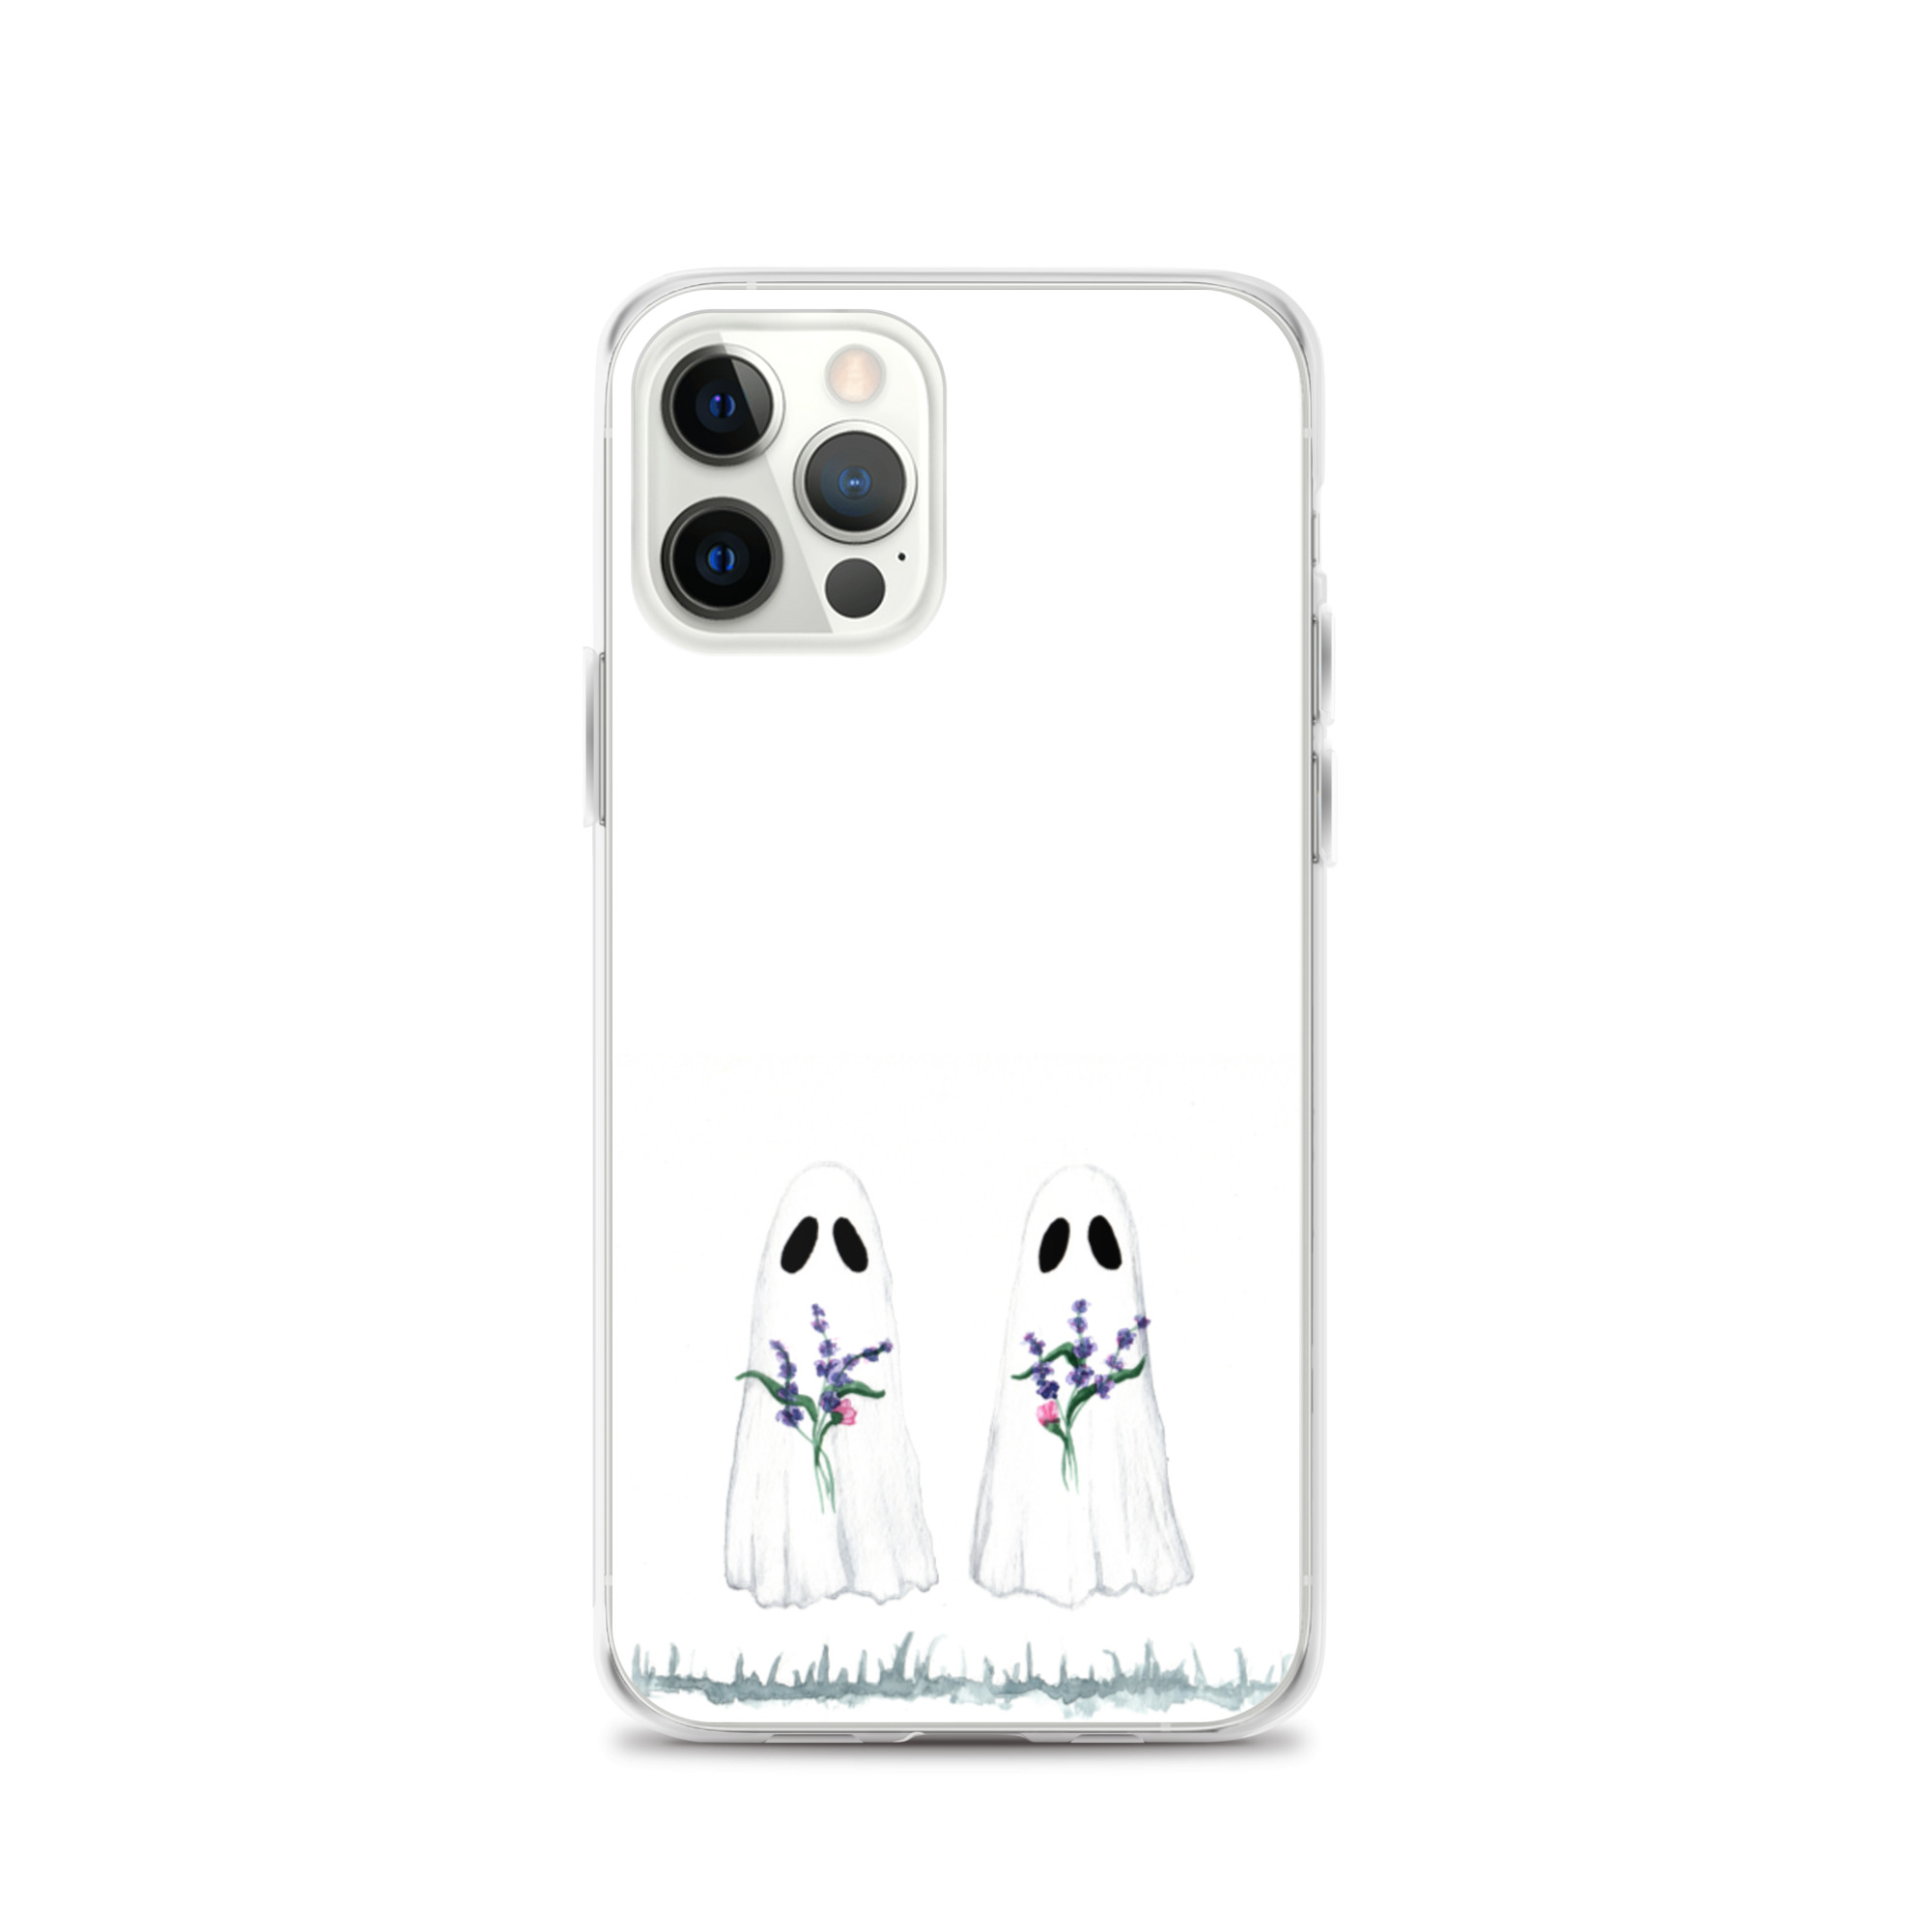 iphone-case-iphone-12-pro-case-on-phone-62f15975025a6.jpg